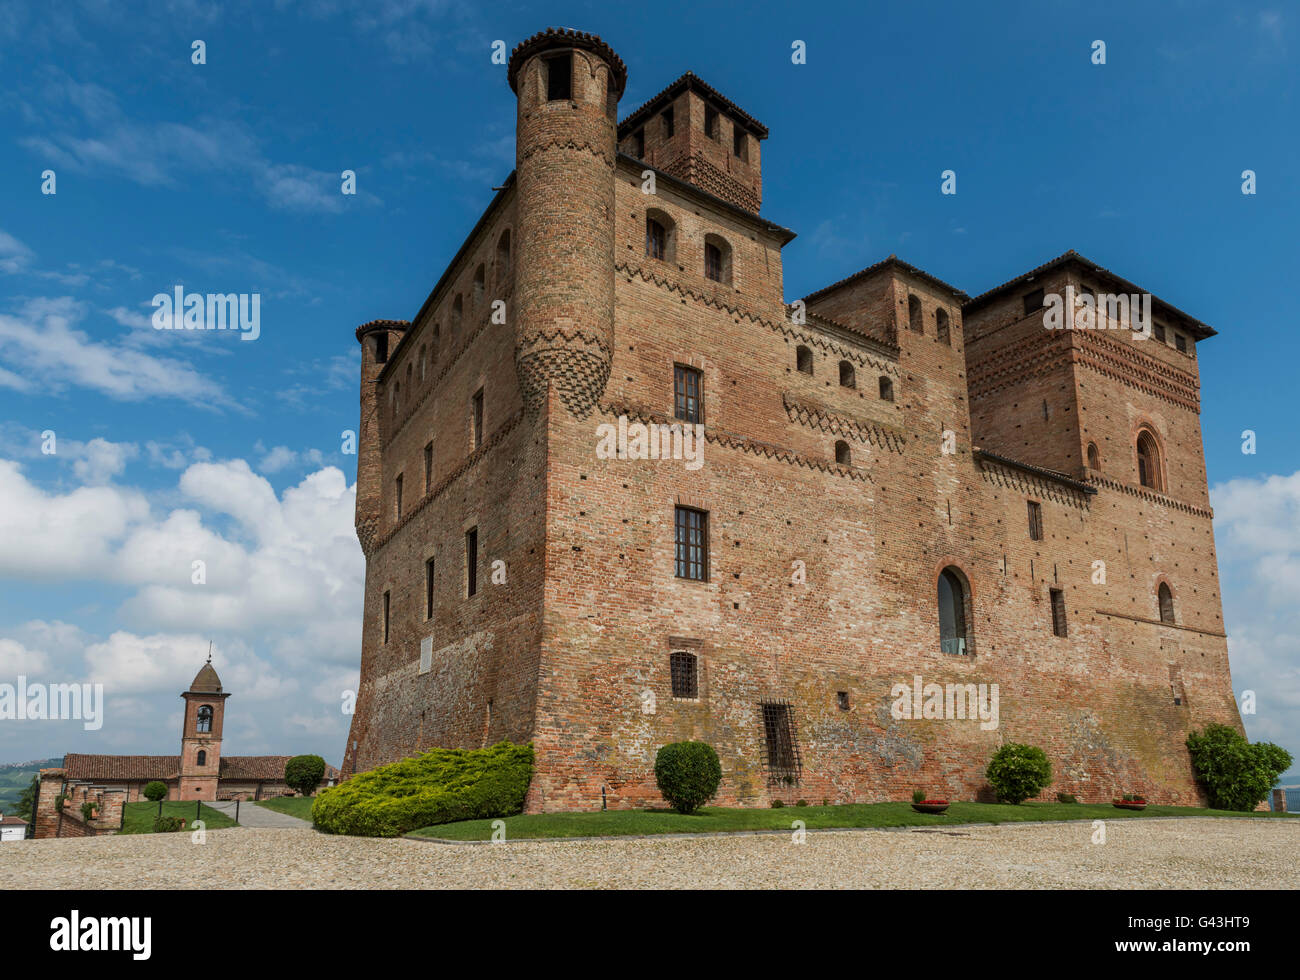 Grinzane Cavour, Italy - May 30, 2016: Wine Castle Grinzane Cavour and Church in  Piedmont in Barolo district in Italy. Stock Photo